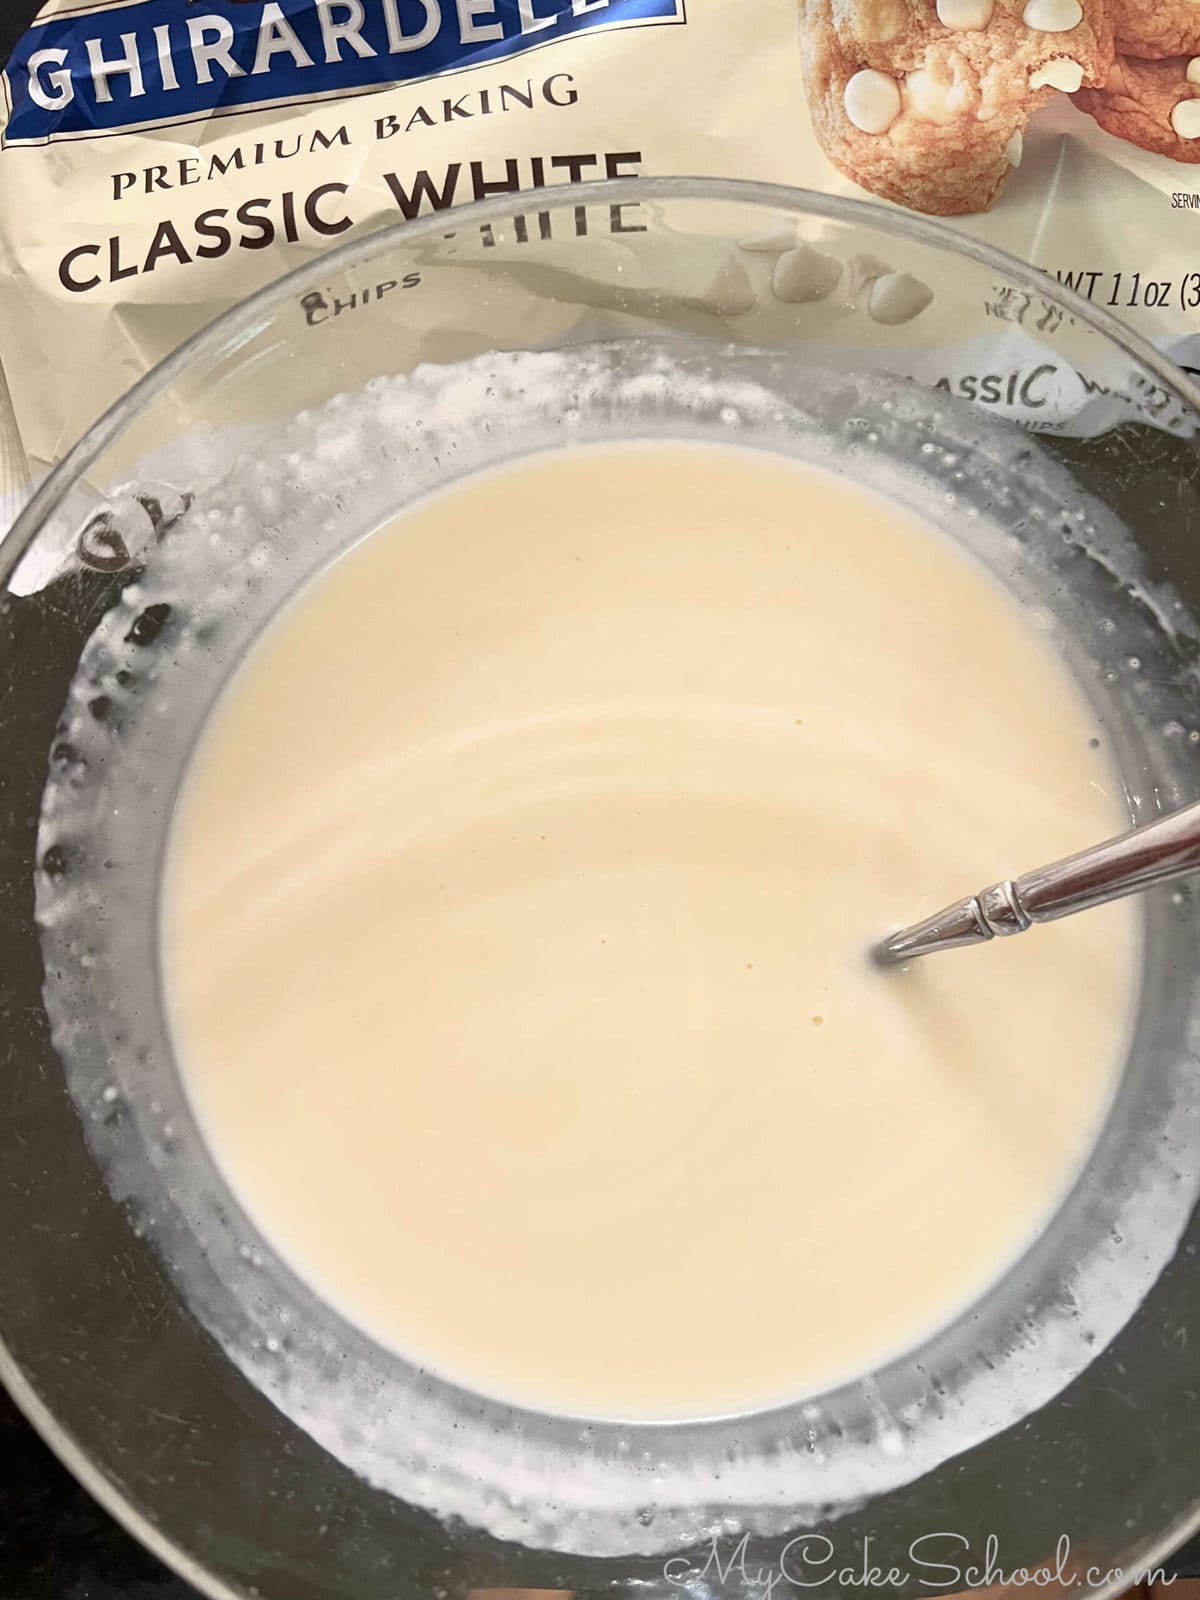 Bowl of Melted White Chocolate and Cream Mixture